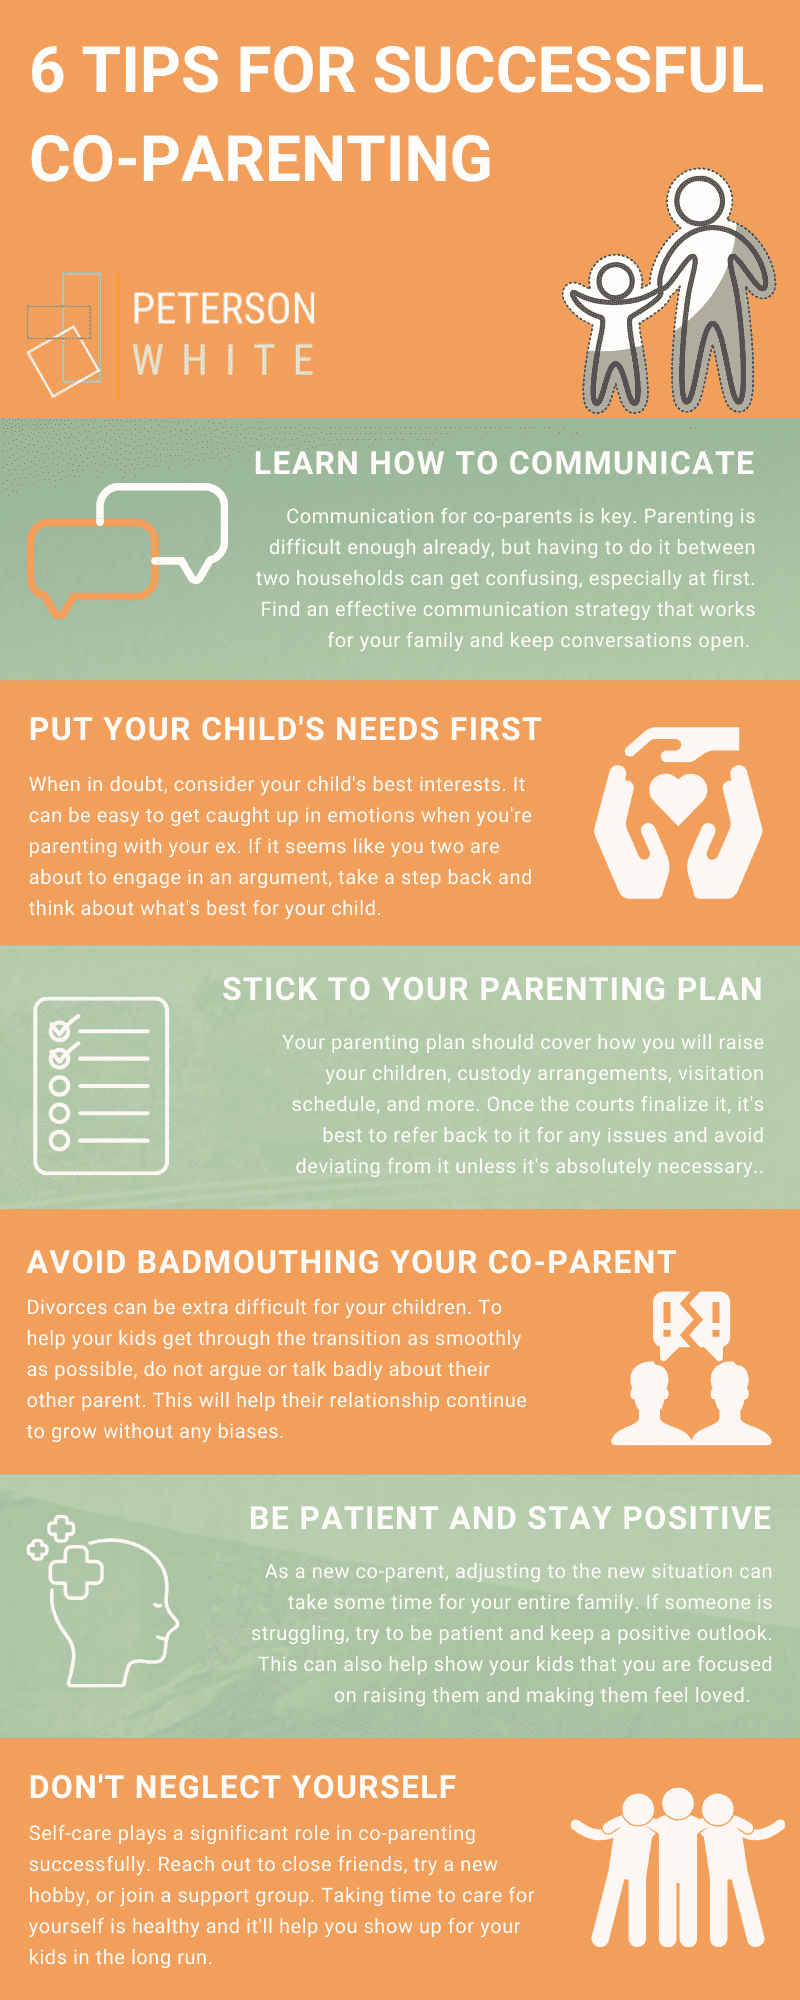 Co-Parenting Tips 